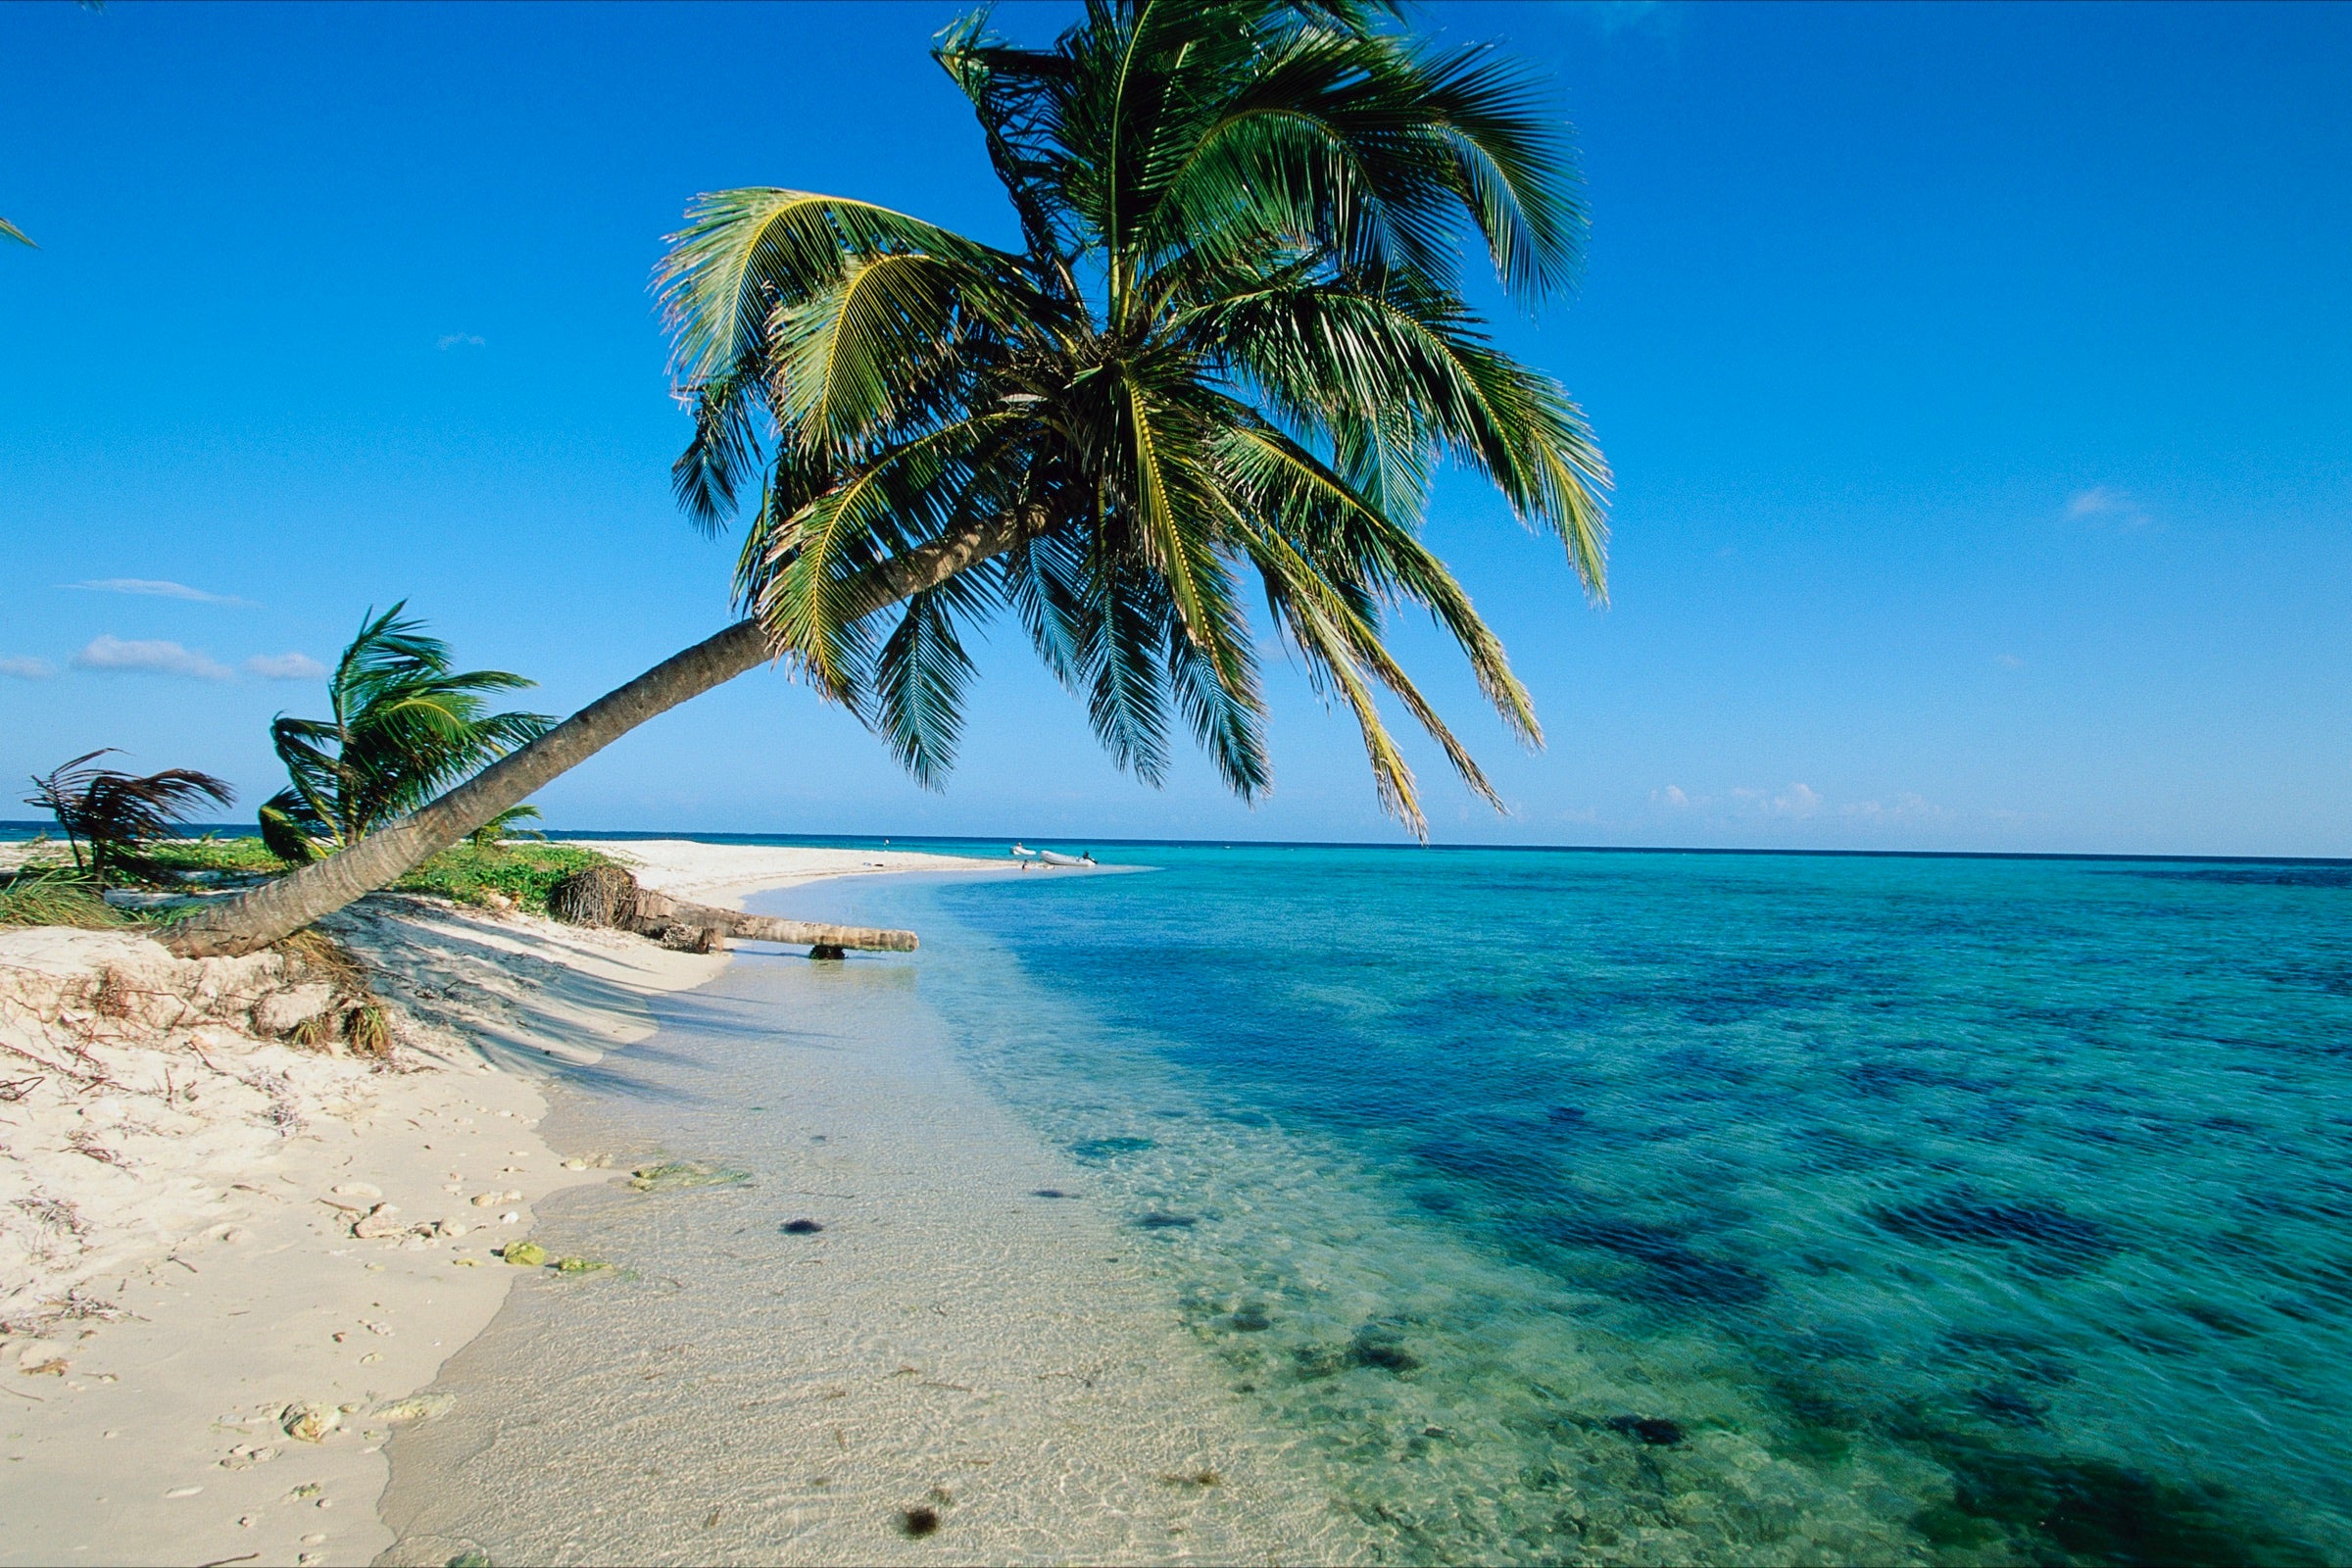 Palm tree on a beach in Belize